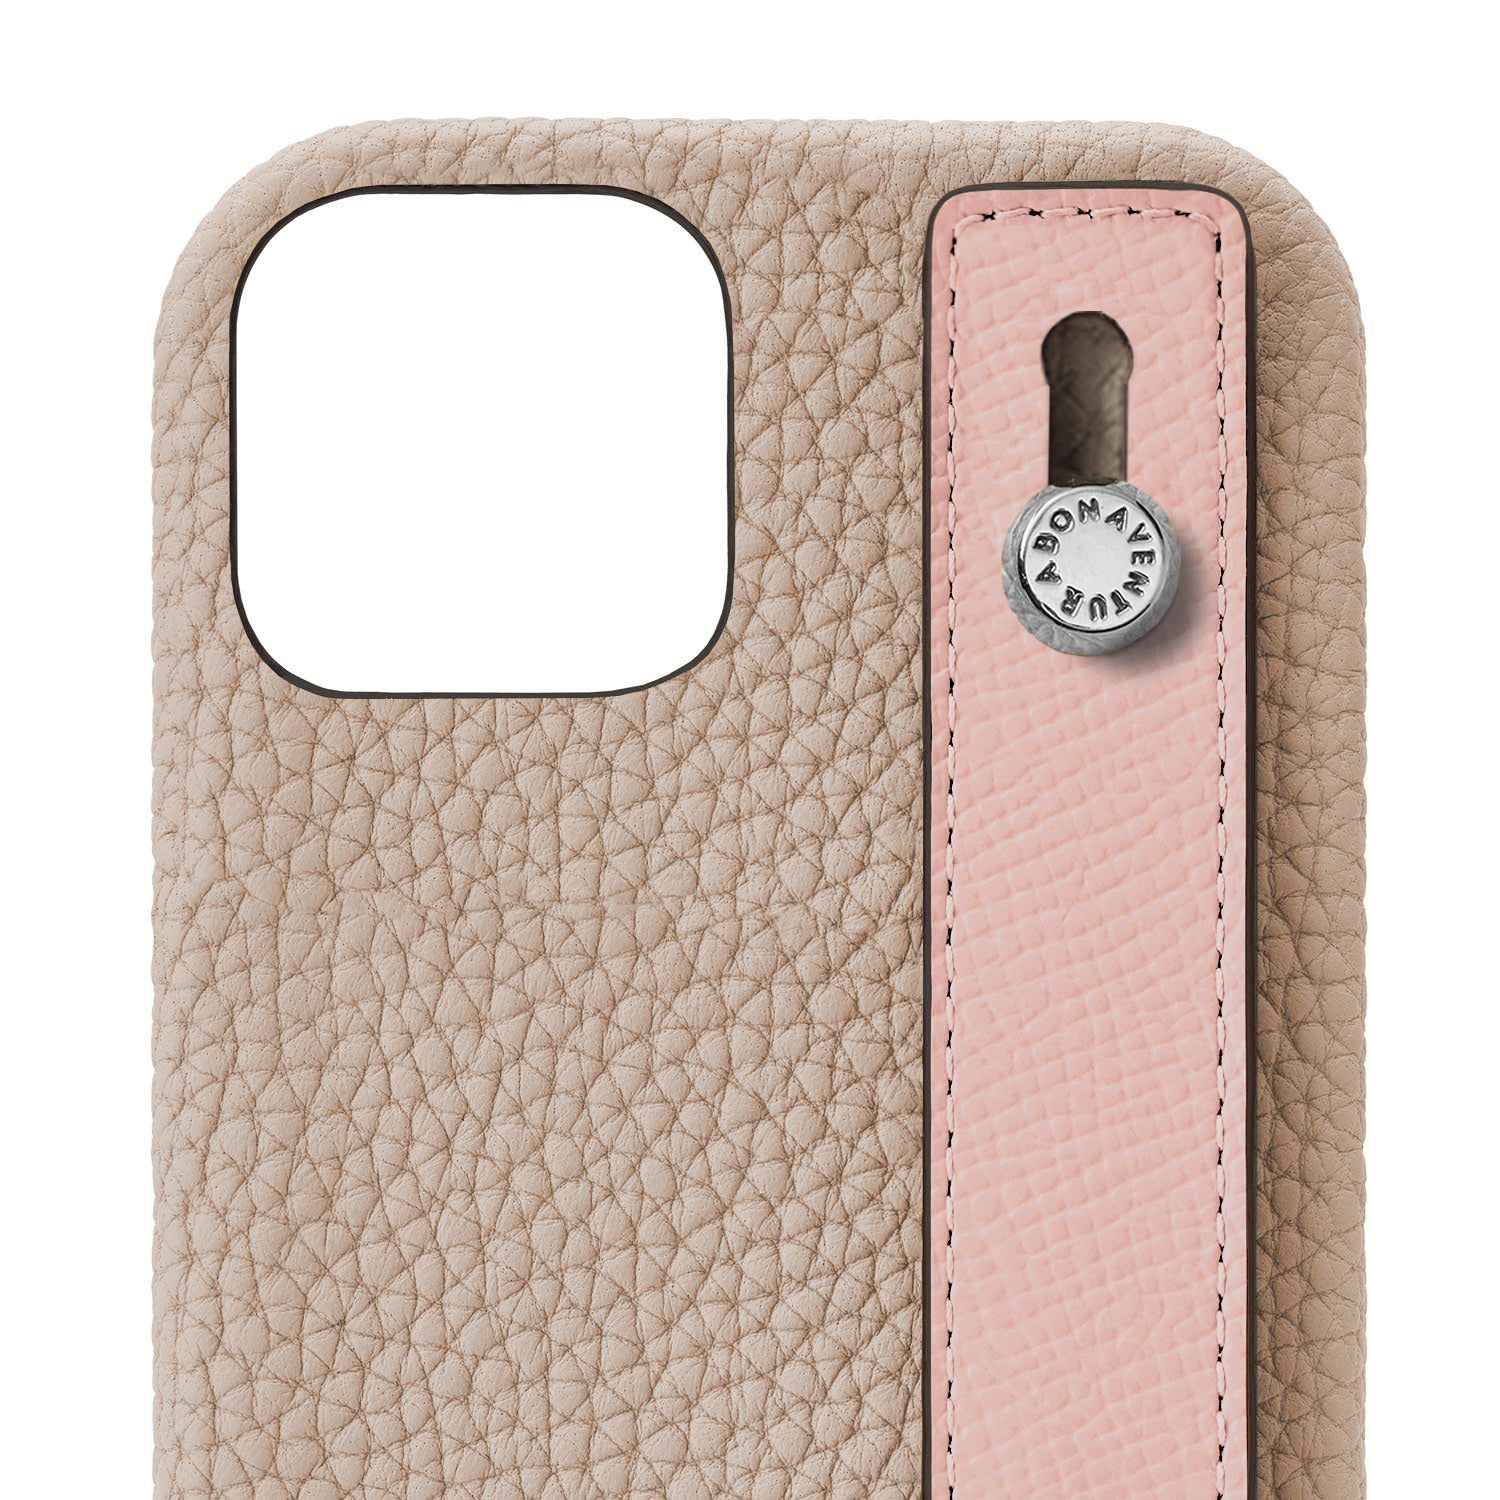 (iPhone 12 / 12 Pro) Back cover case with handle, shrink leather